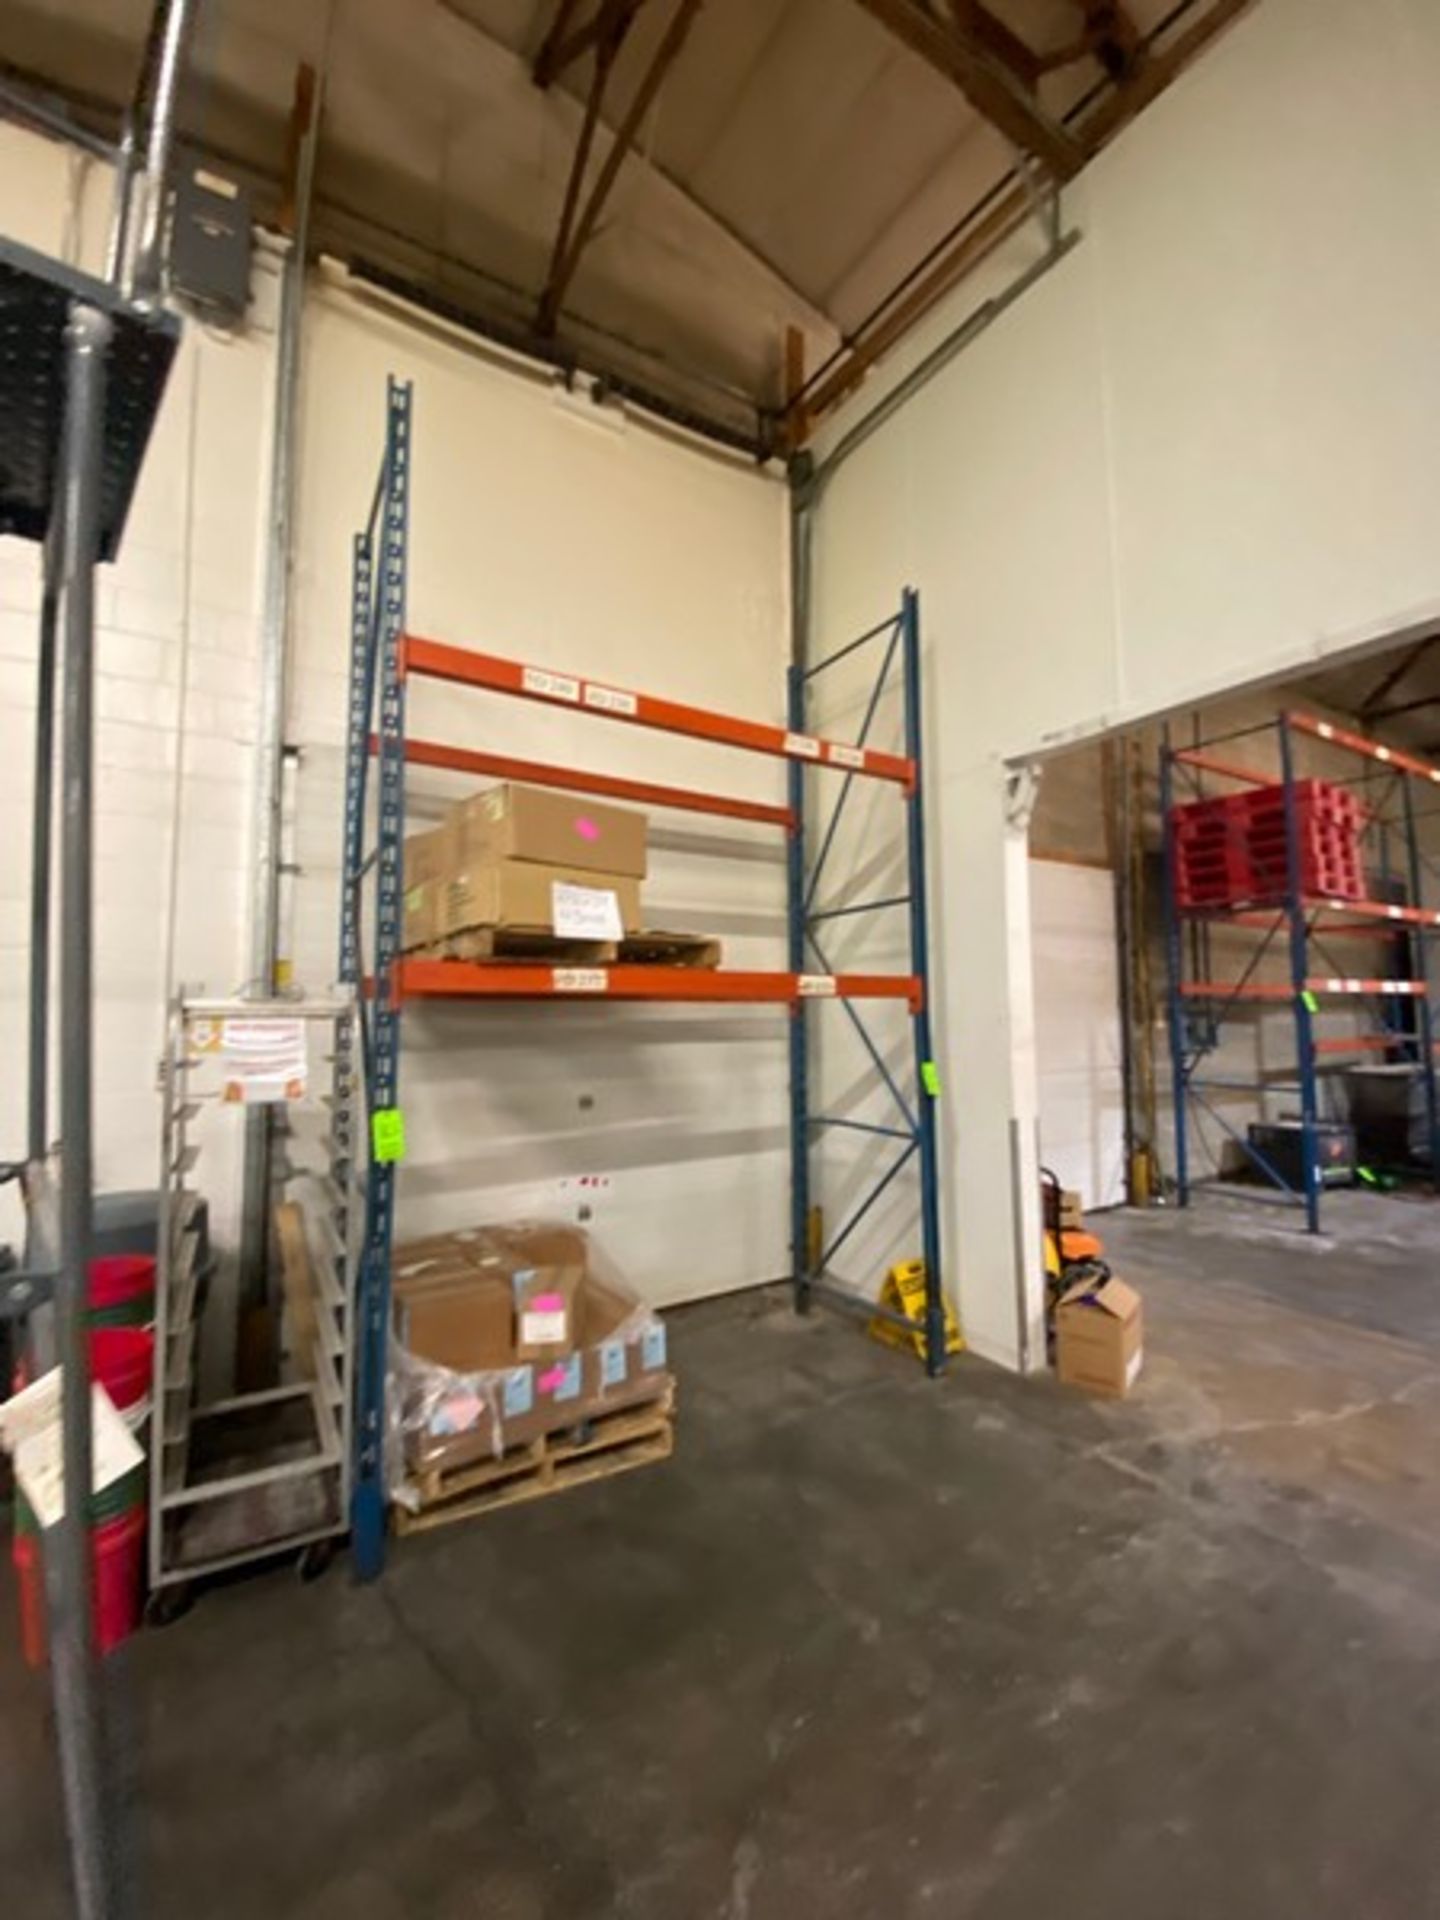 1-SECTION OF PALLET RACKING, WITH UPRIGHTS & CROSS BEAMS (LOCATED IN CALLERY, PA) - Image 2 of 2